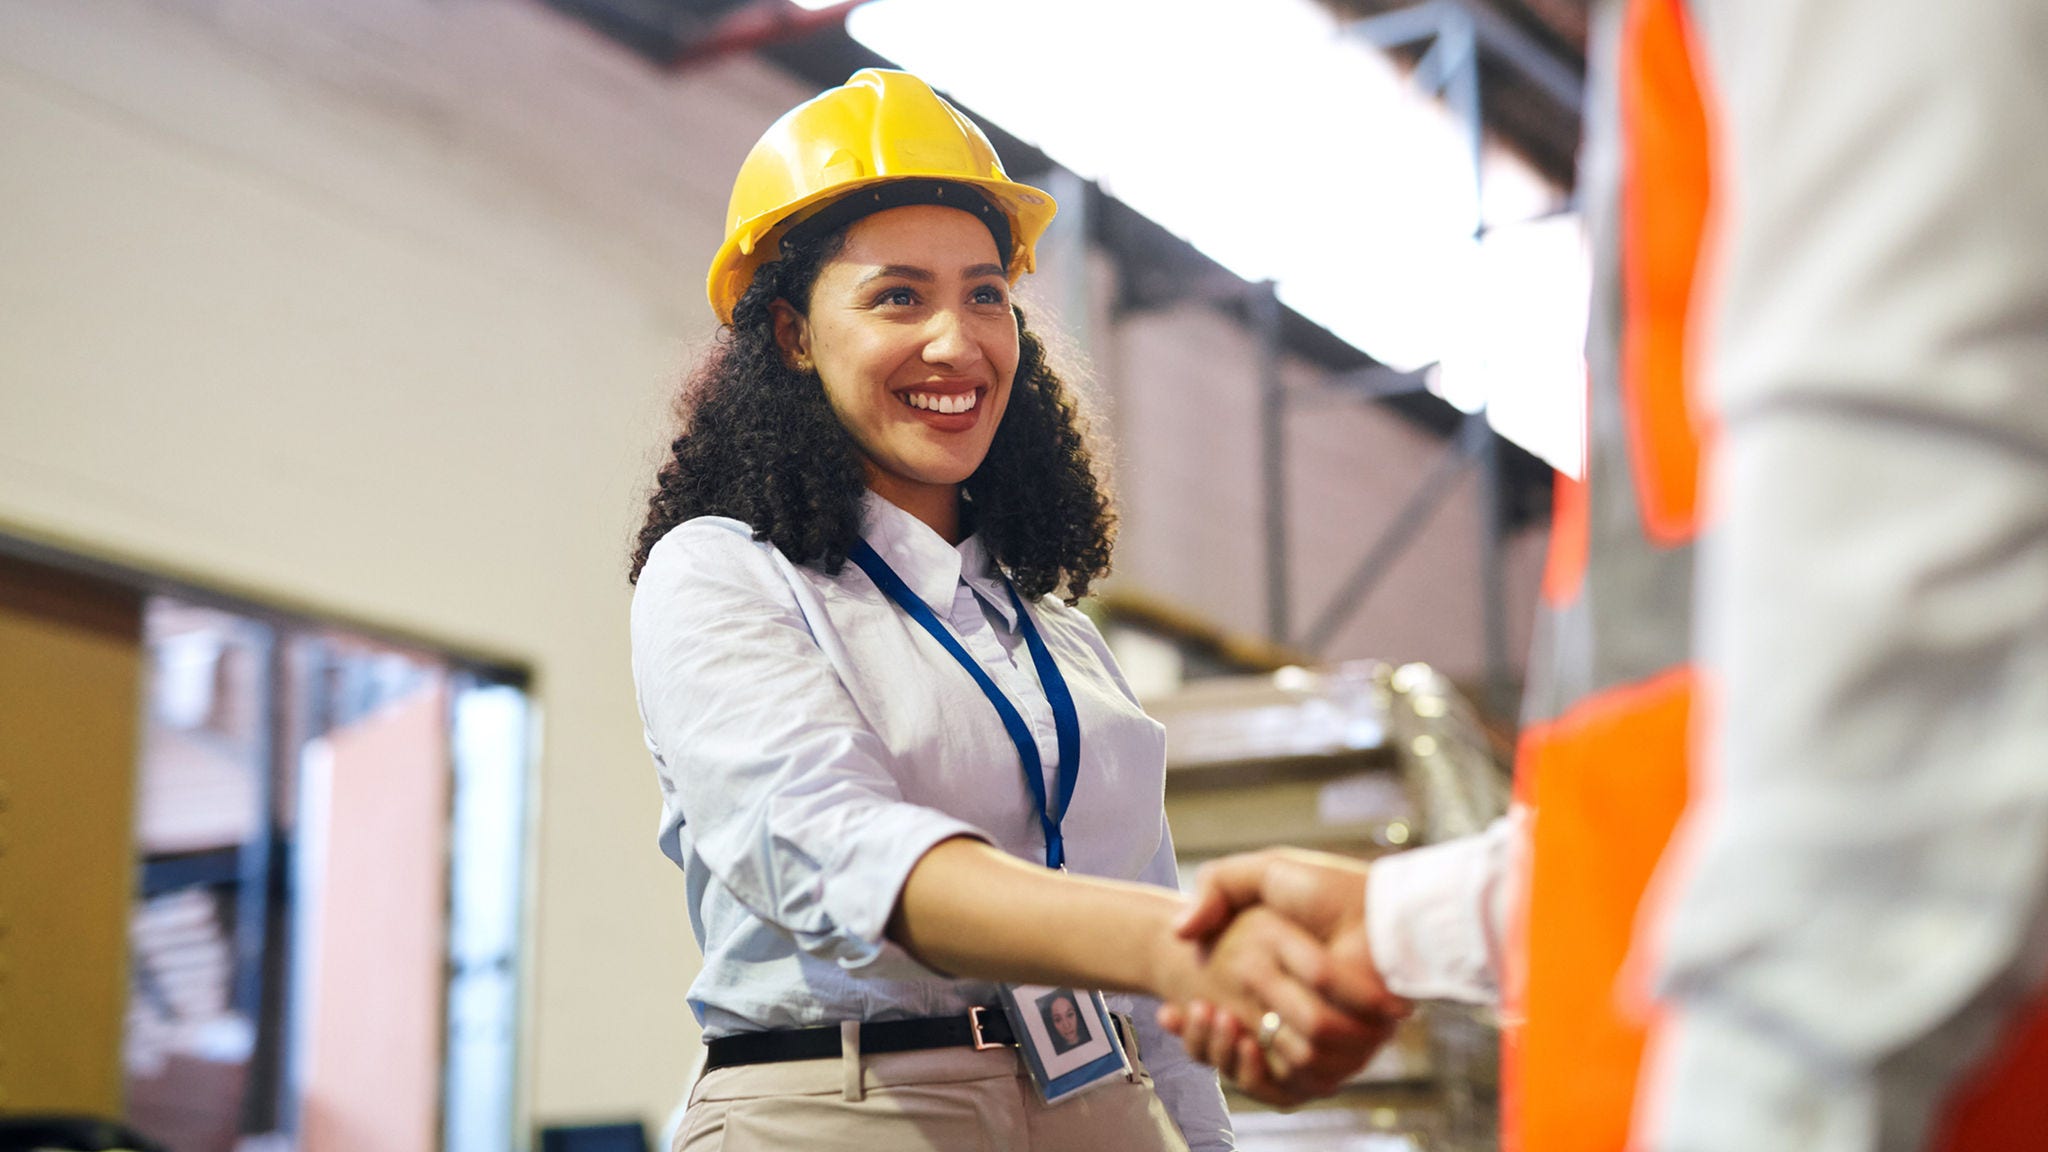 businesswoman wearing a hard hat shakes hands with a construction worker